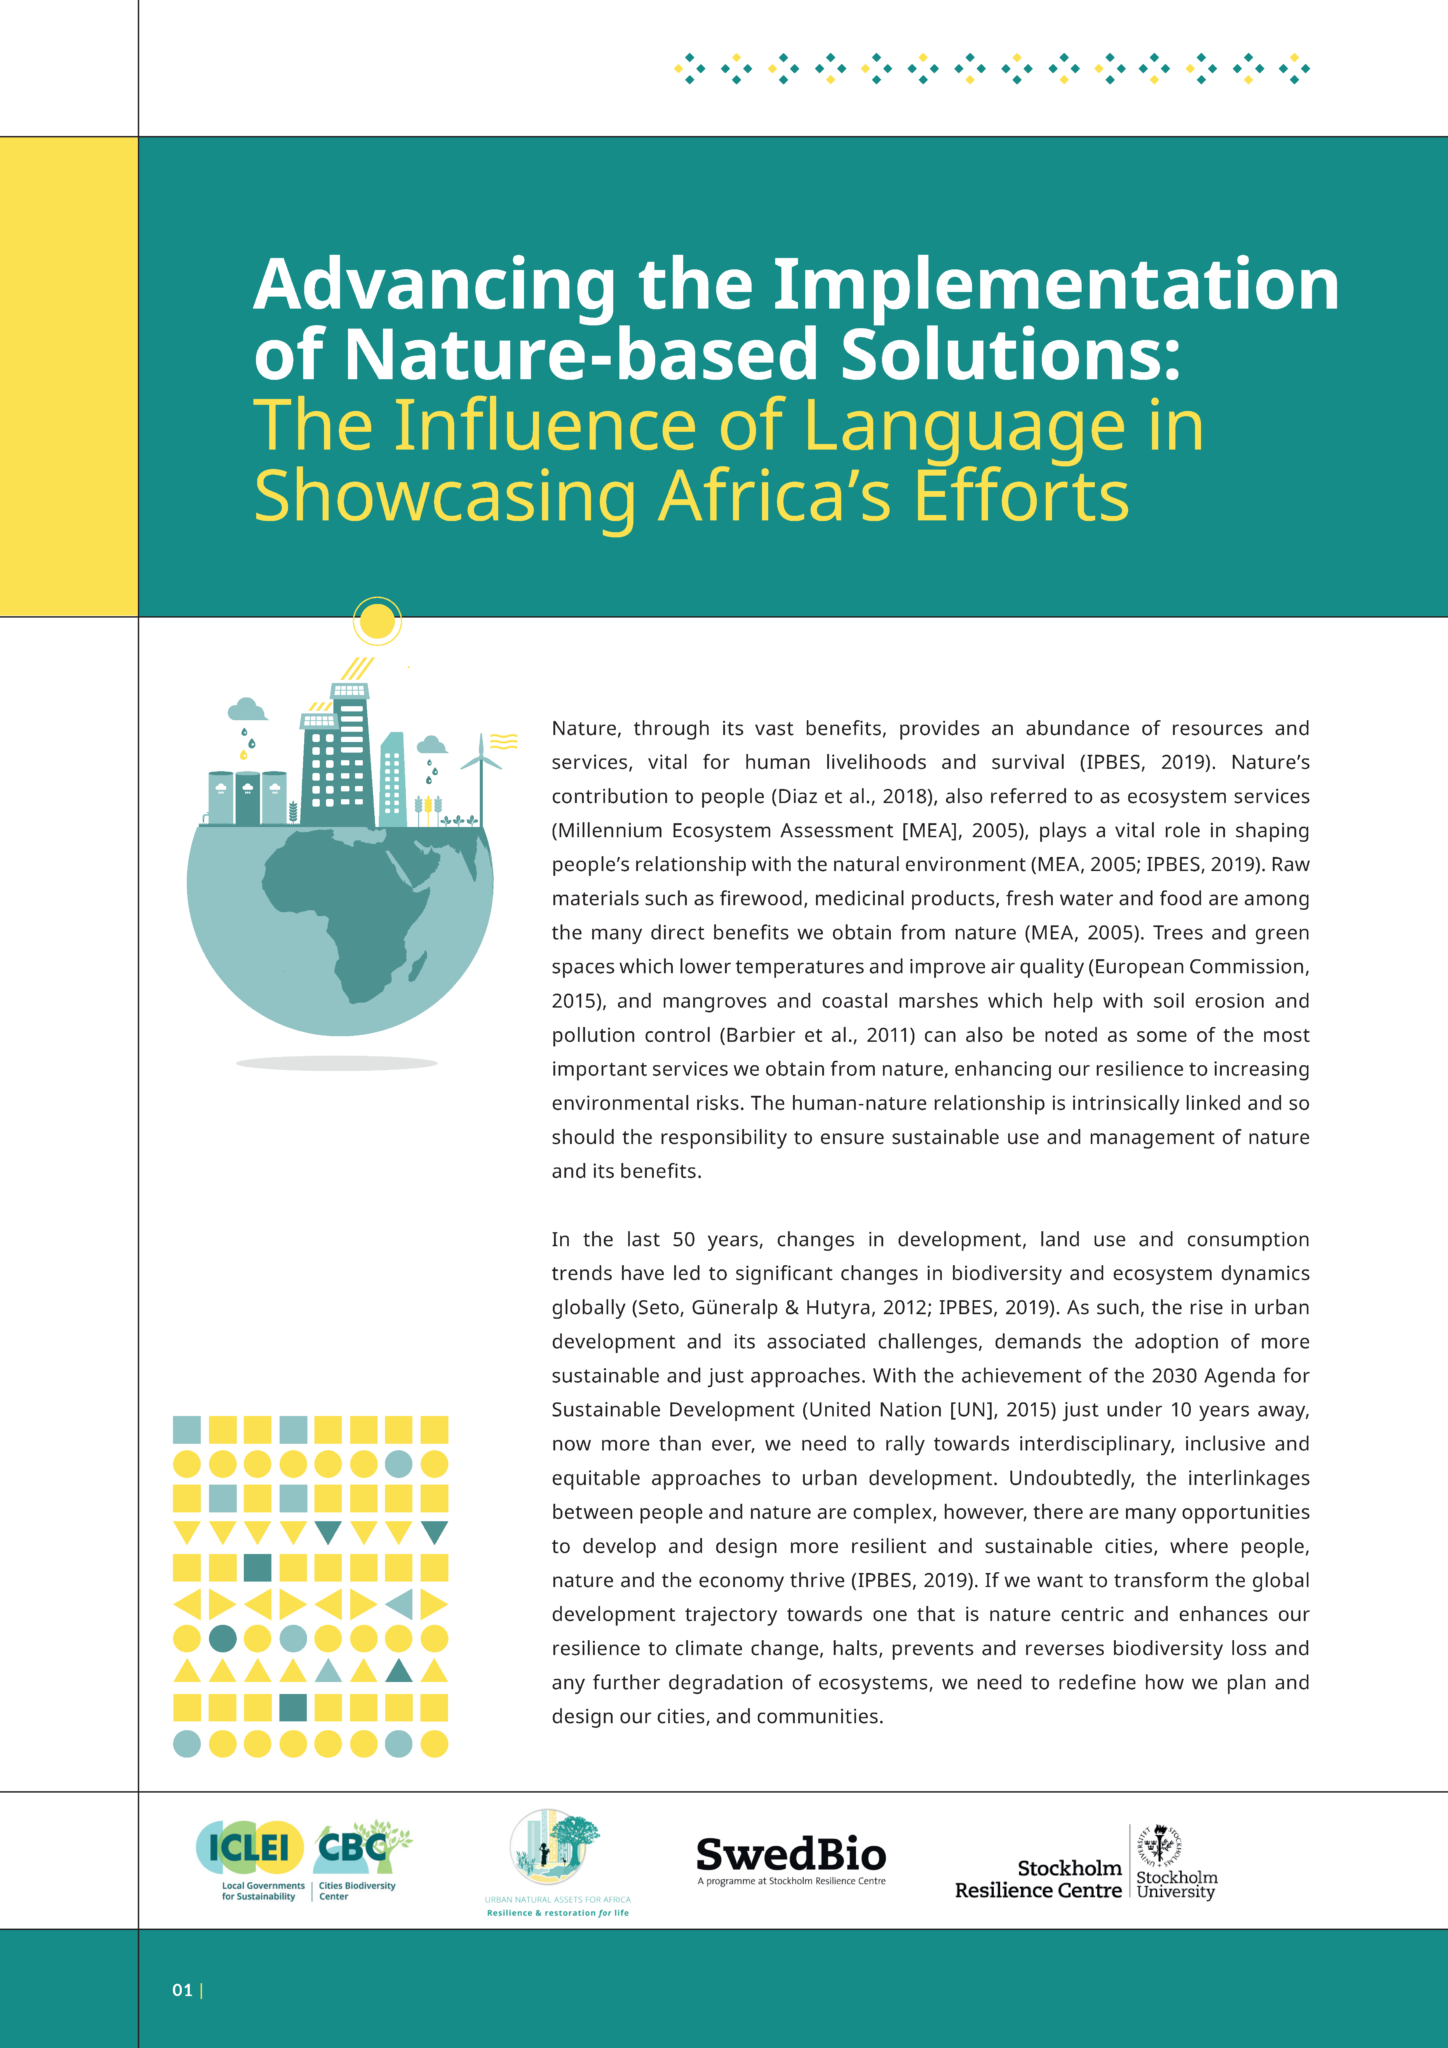 Advancing the Implementation of Nature-based Solutions: The influence of language in showcasing Africa&#8217;s efforts